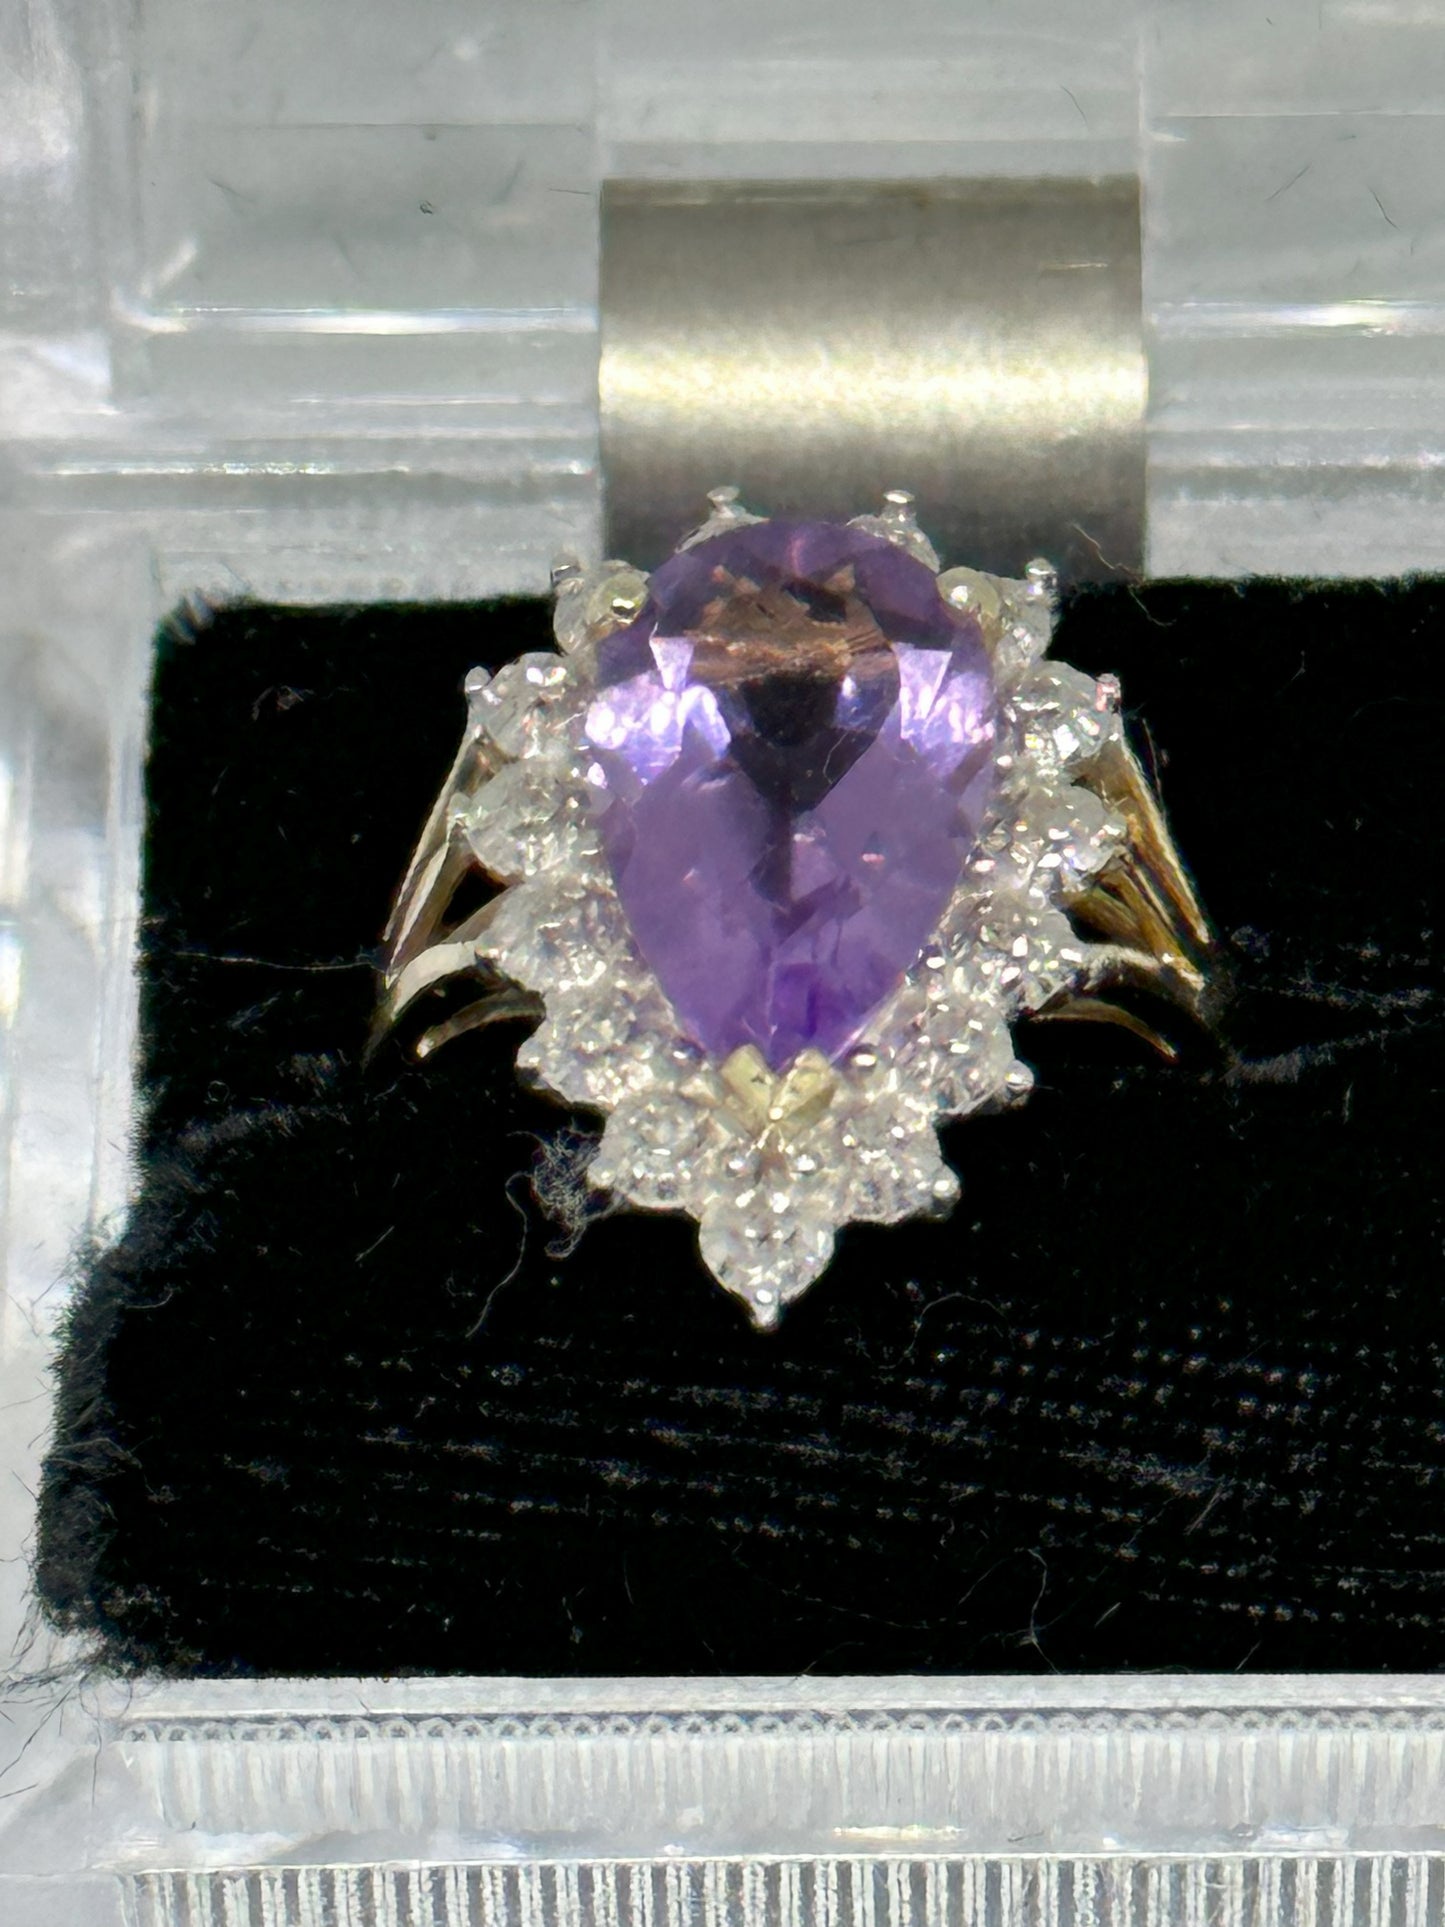 Vintage Pear Shaped Cut Amethyst 14K Yellow Gold Ring w/ 9K White Gold and Diamonds Surround